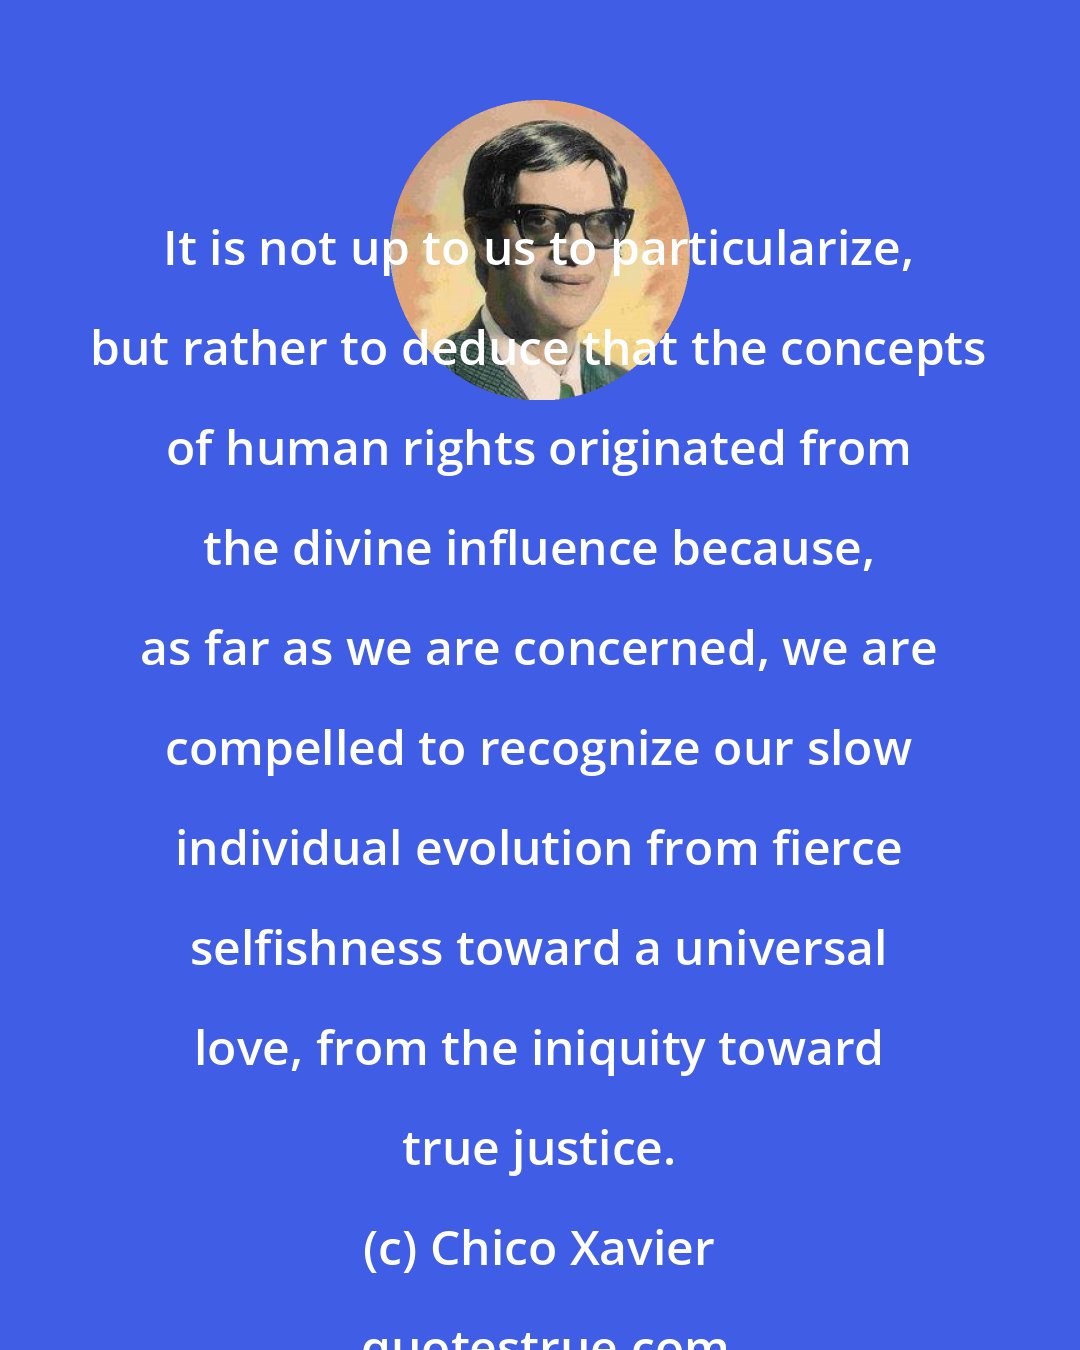 Chico Xavier: It is not up to us to particularize, but rather to deduce that the concepts of human rights originated from the divine influence because, as far as we are concerned, we are compelled to recognize our slow individual evolution from fierce selfishness toward a universal love, from the iniquity toward true justice.